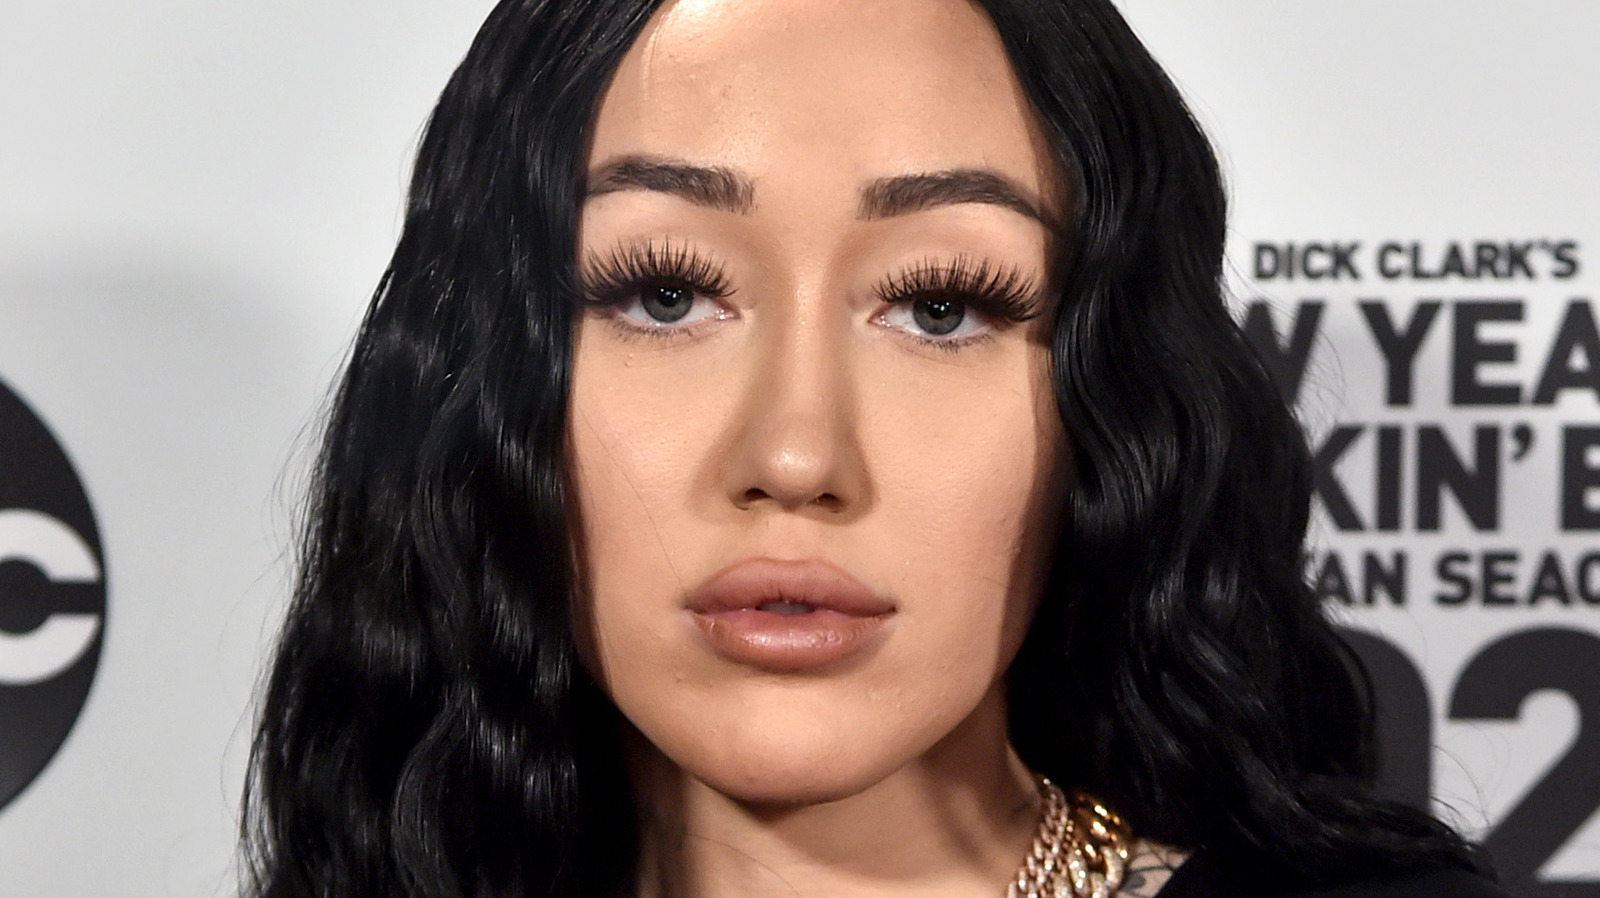 What You Don't Know About Noah Cyrus